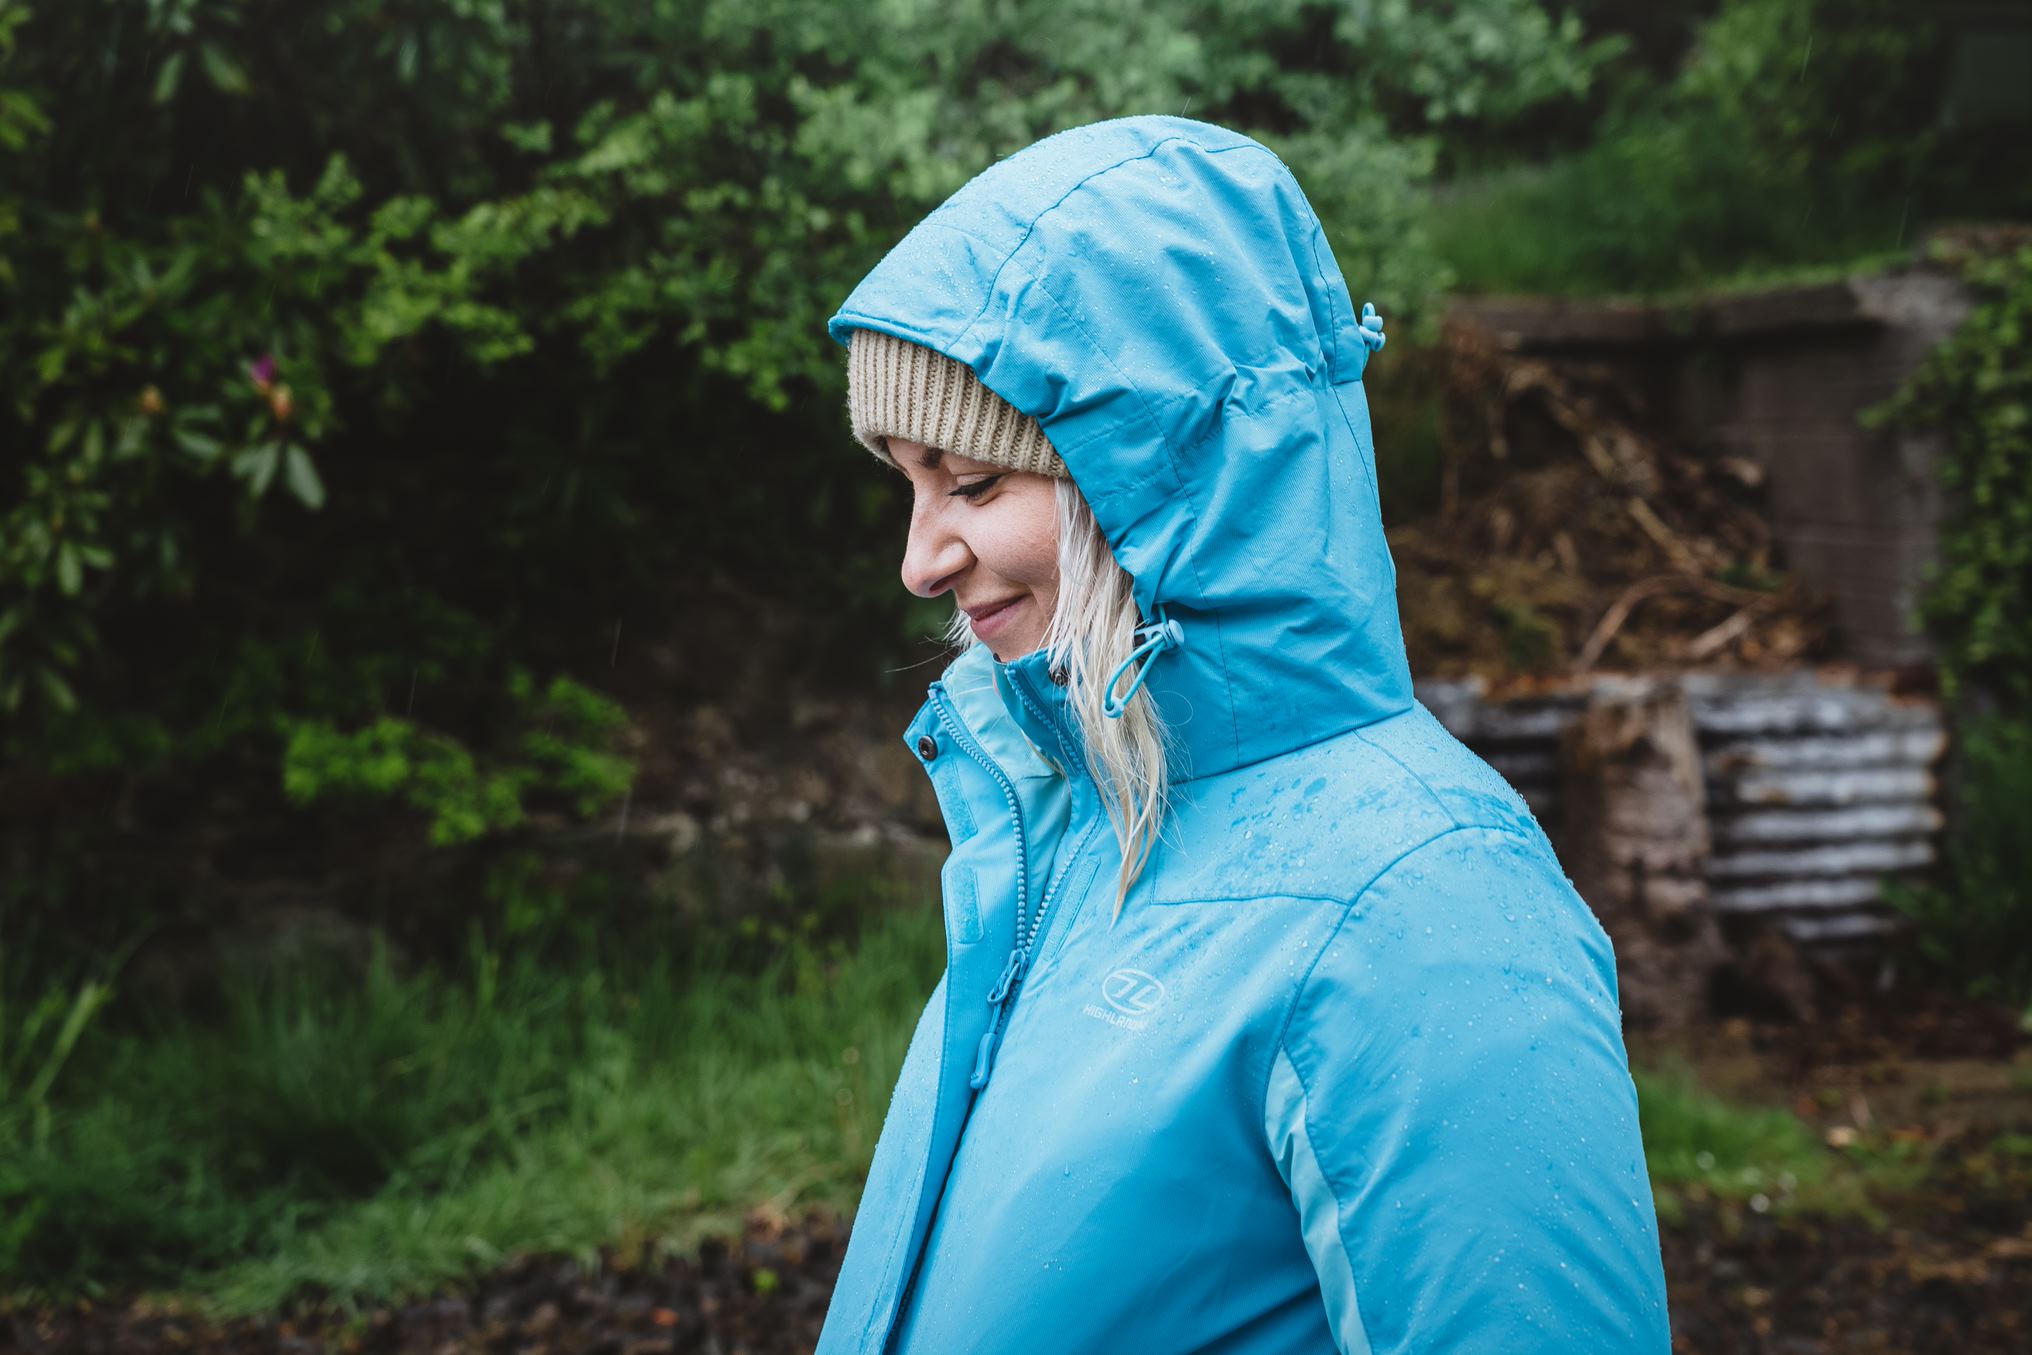 How To Look After Your Waterproof Jacket